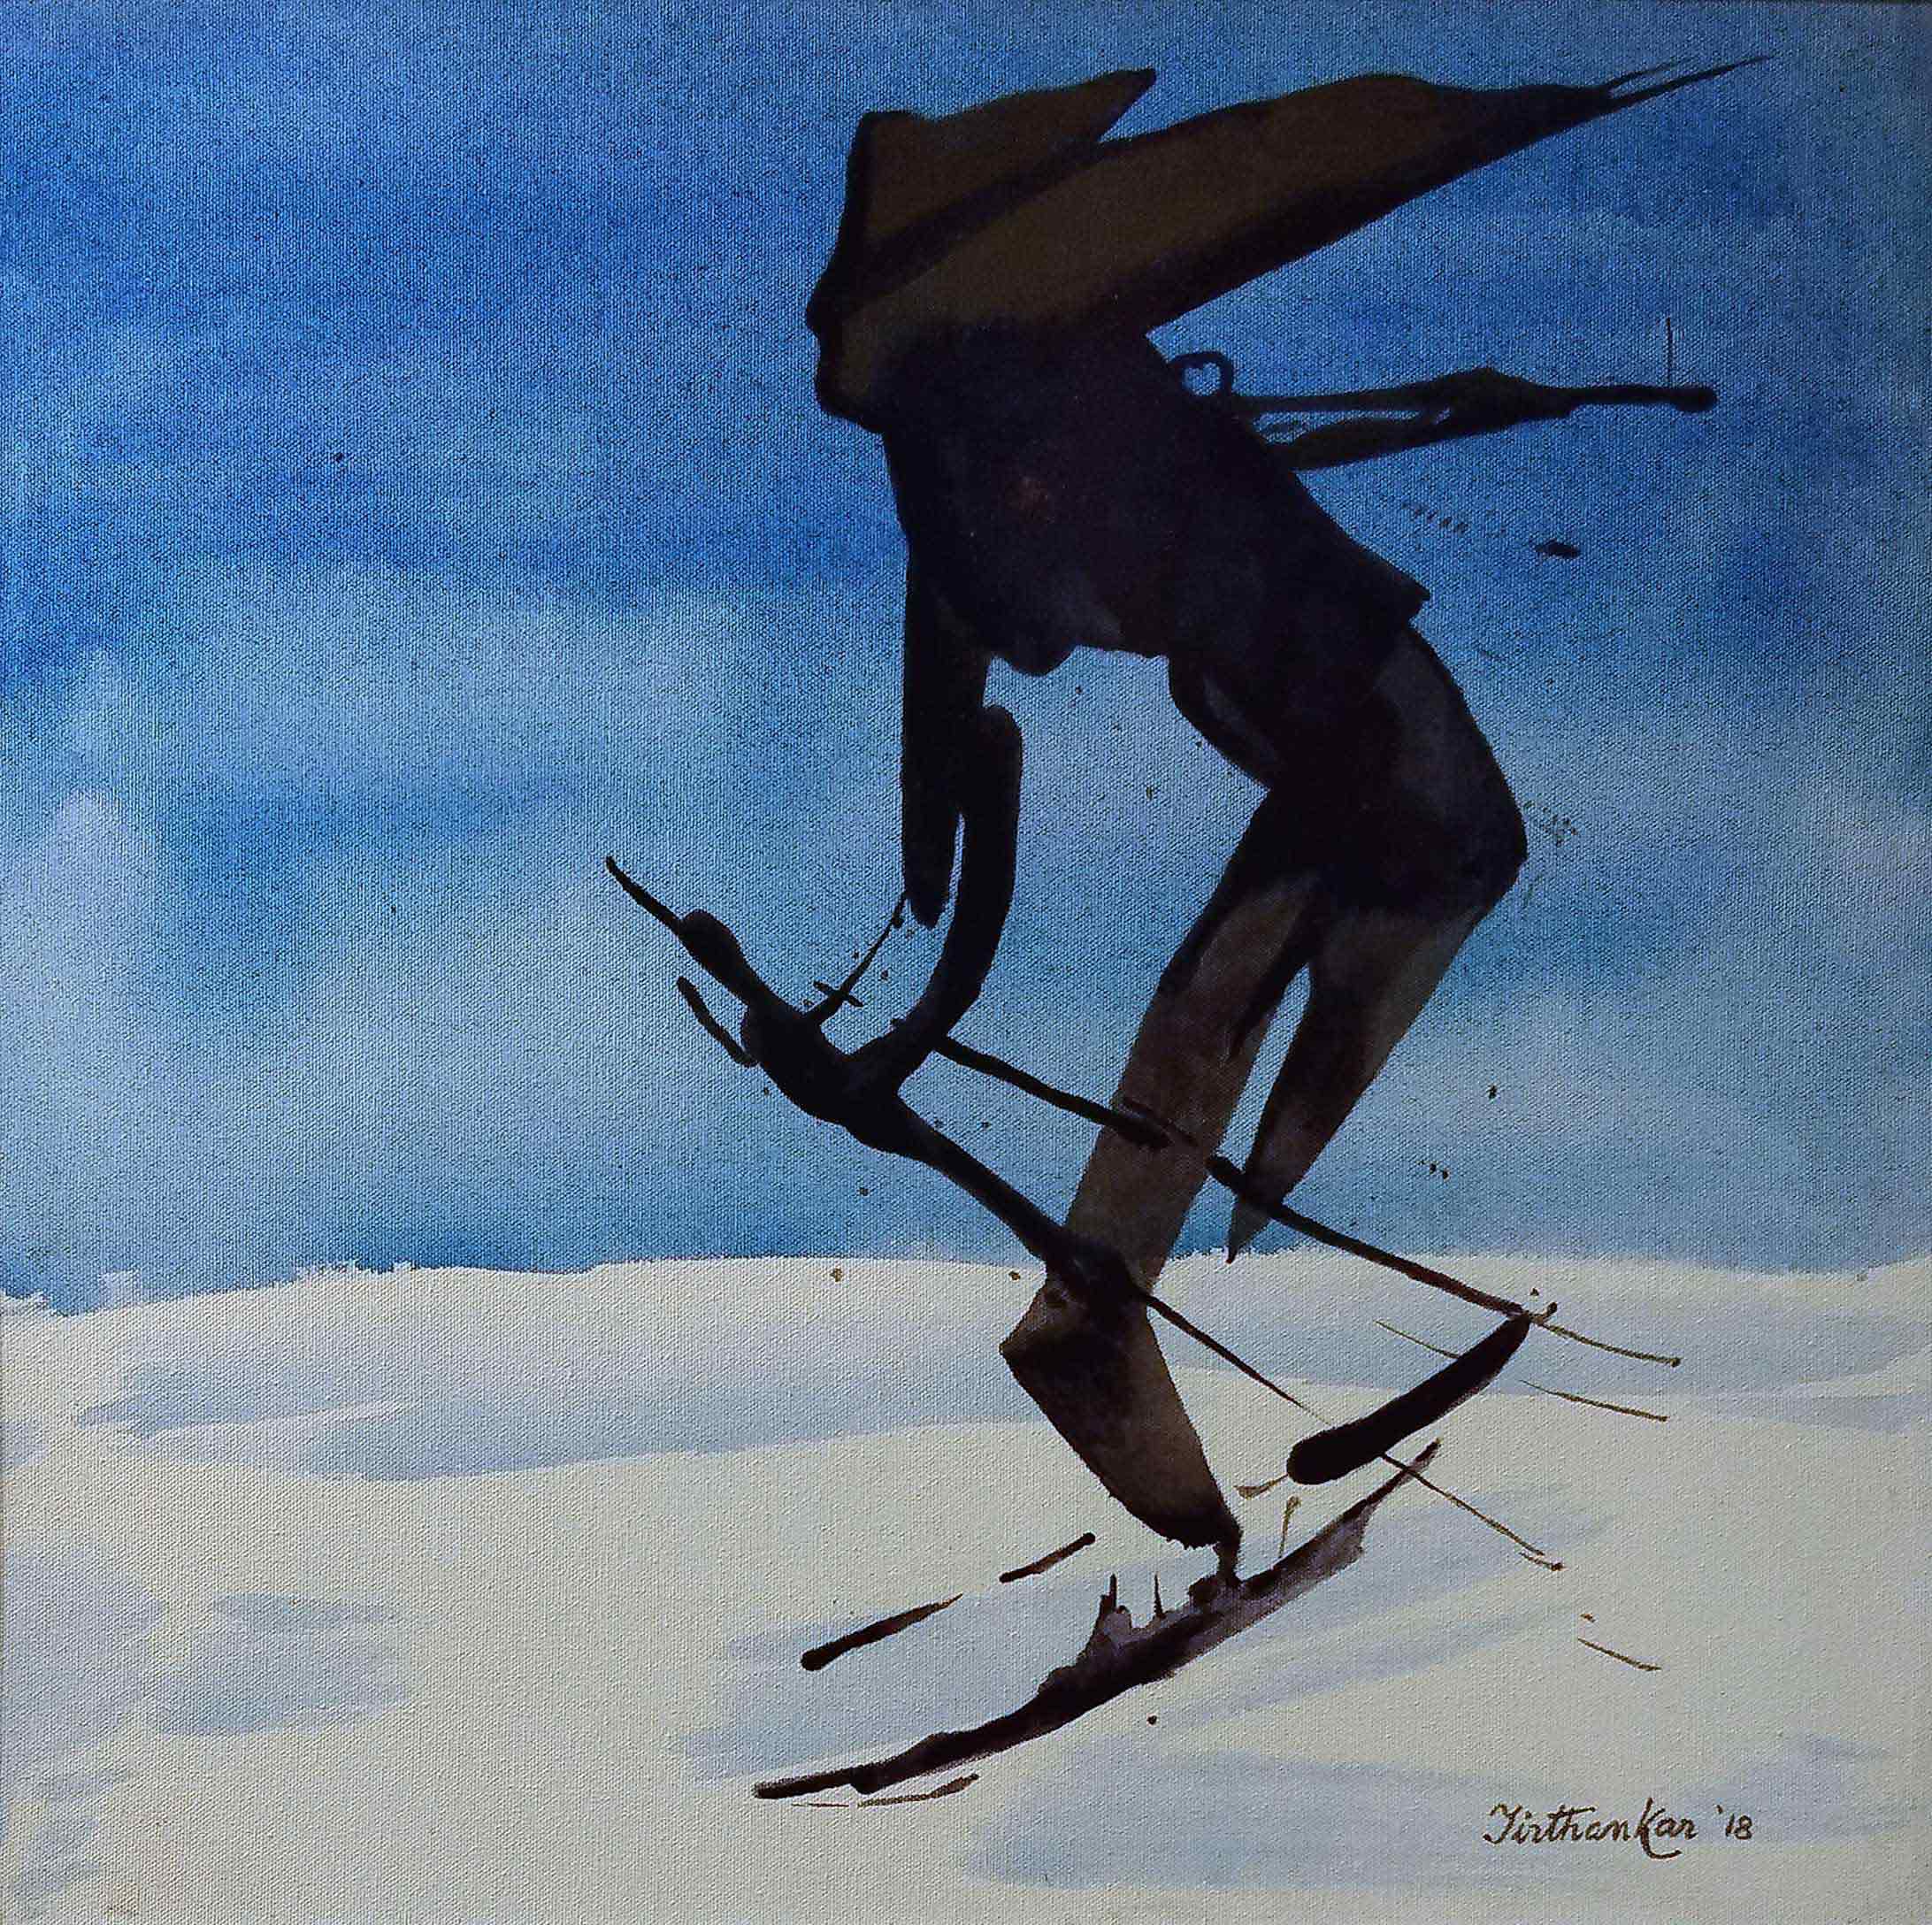 Figurative Painting with Acrylic on Canvas "Skiing" art by Tirthankar Biswas